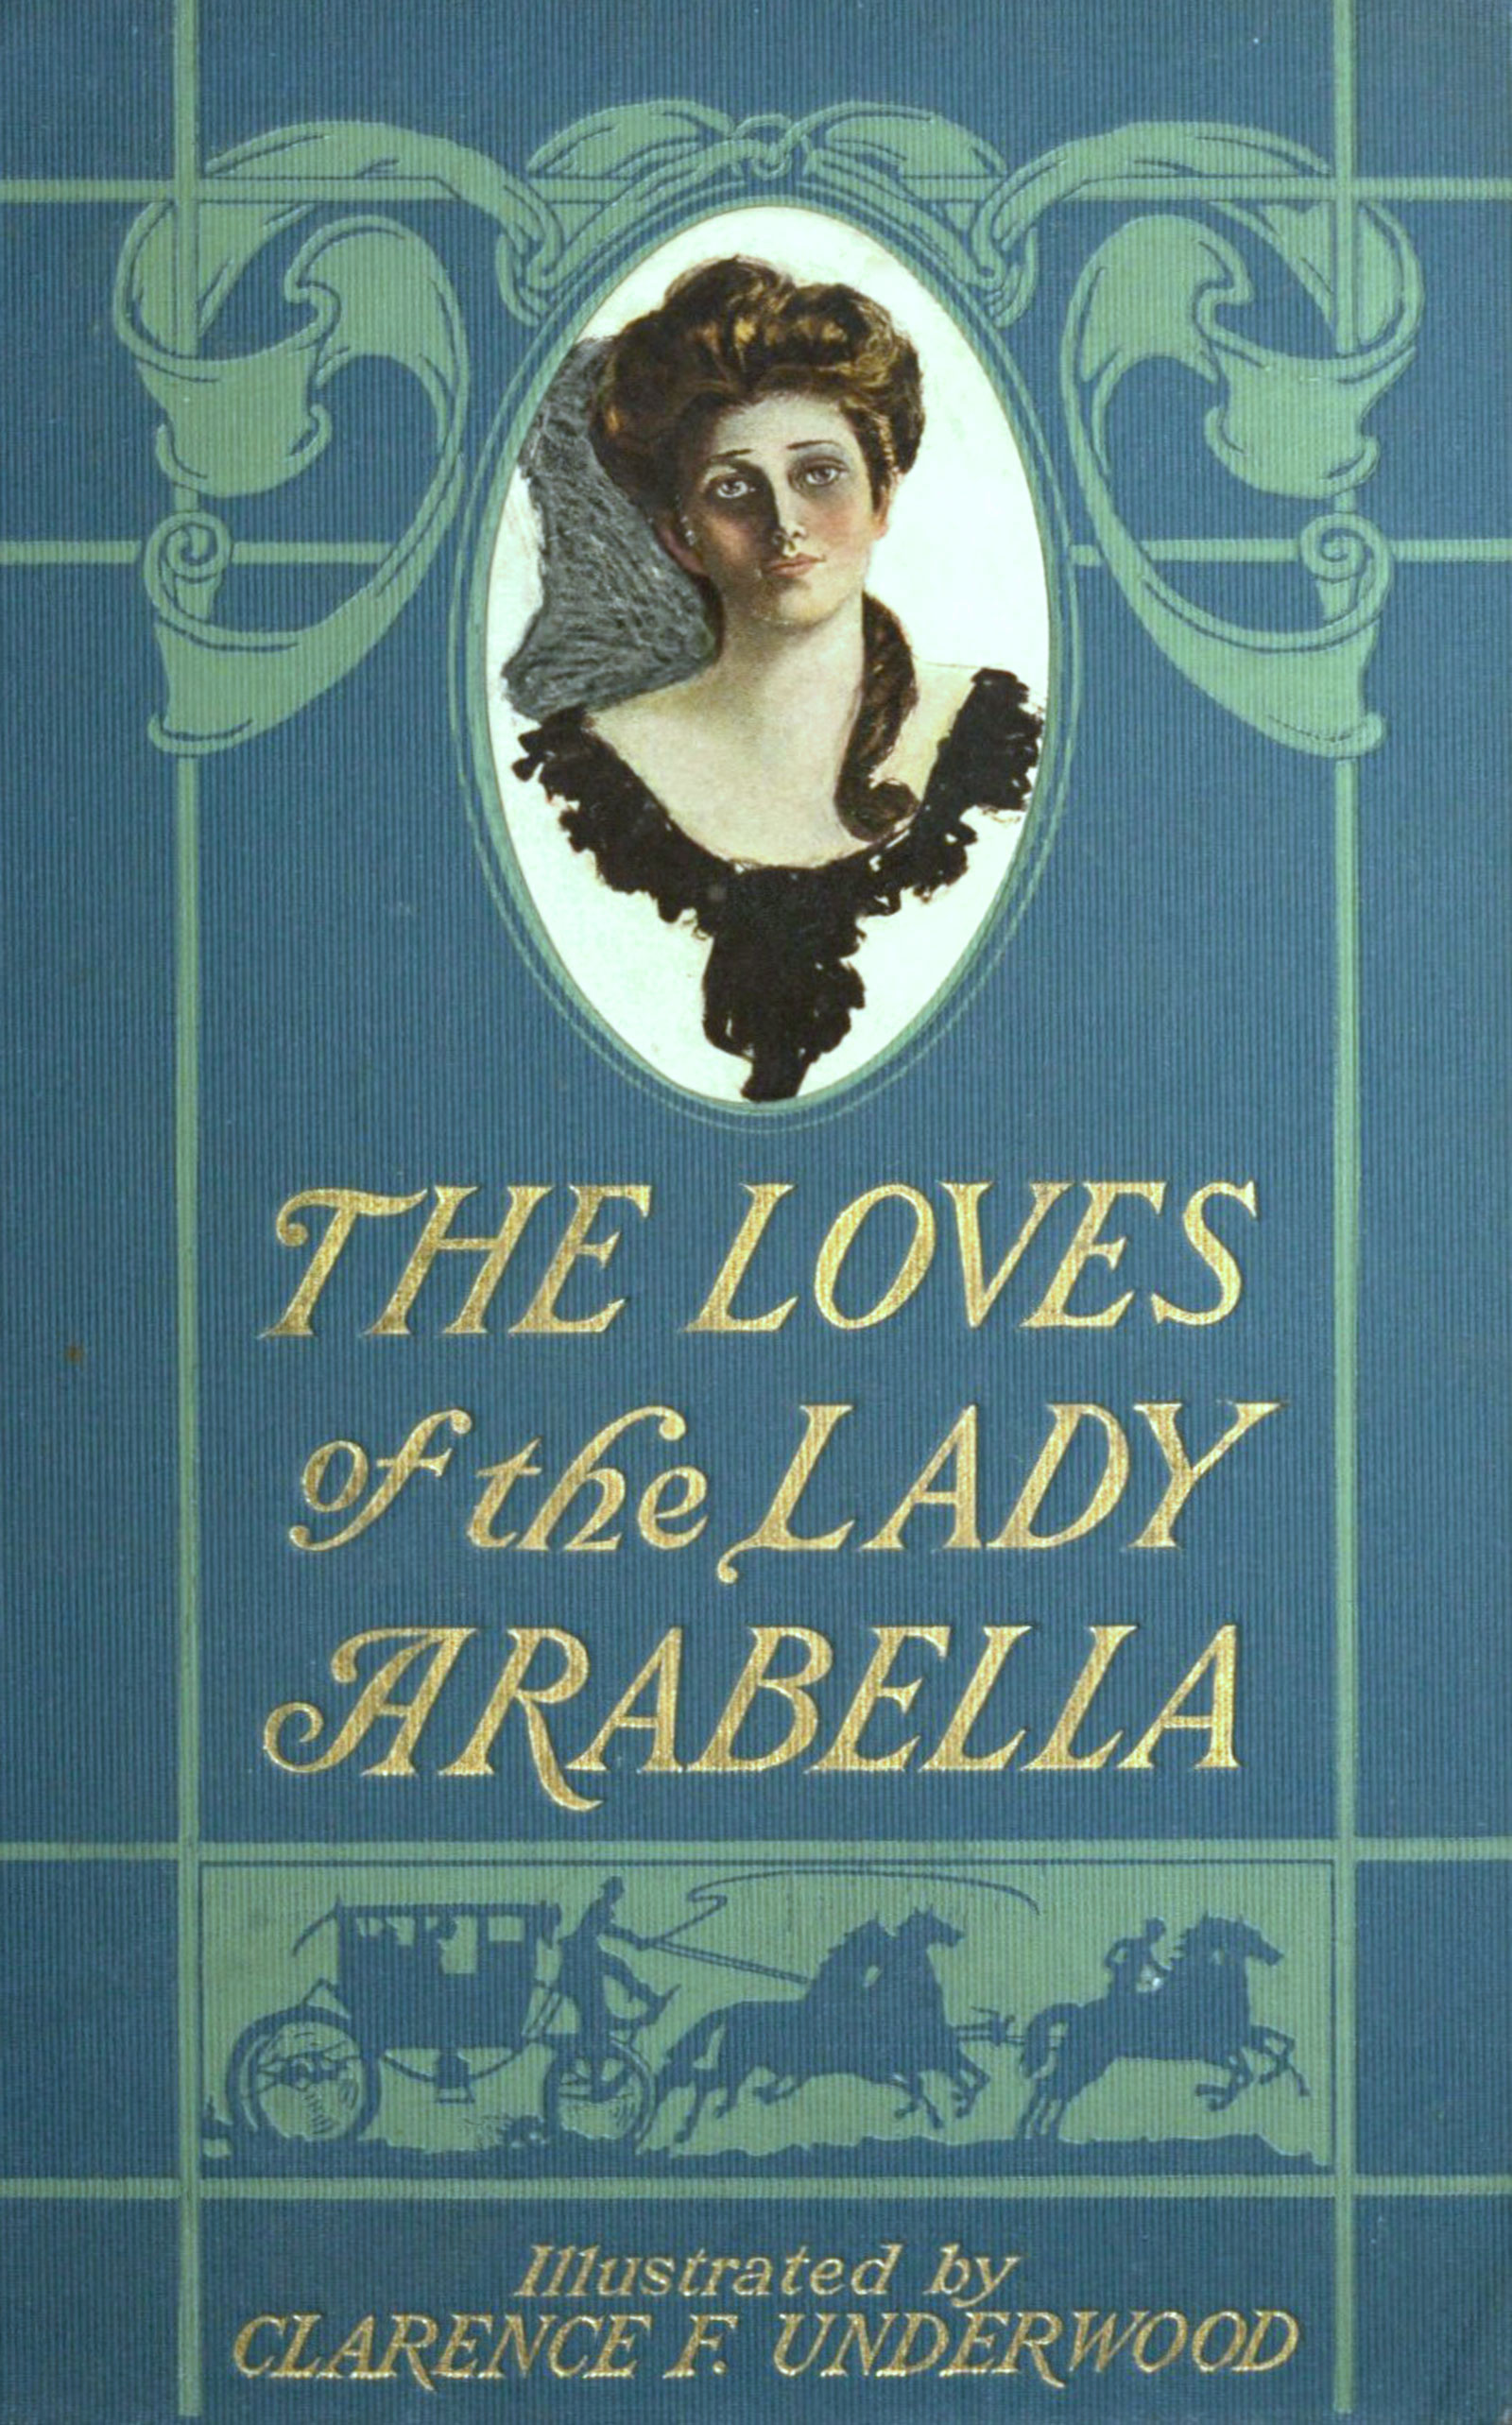 The Loves of the Lady Arabella, by Molly Elliot Seawell—A Project Gutenberg eBook